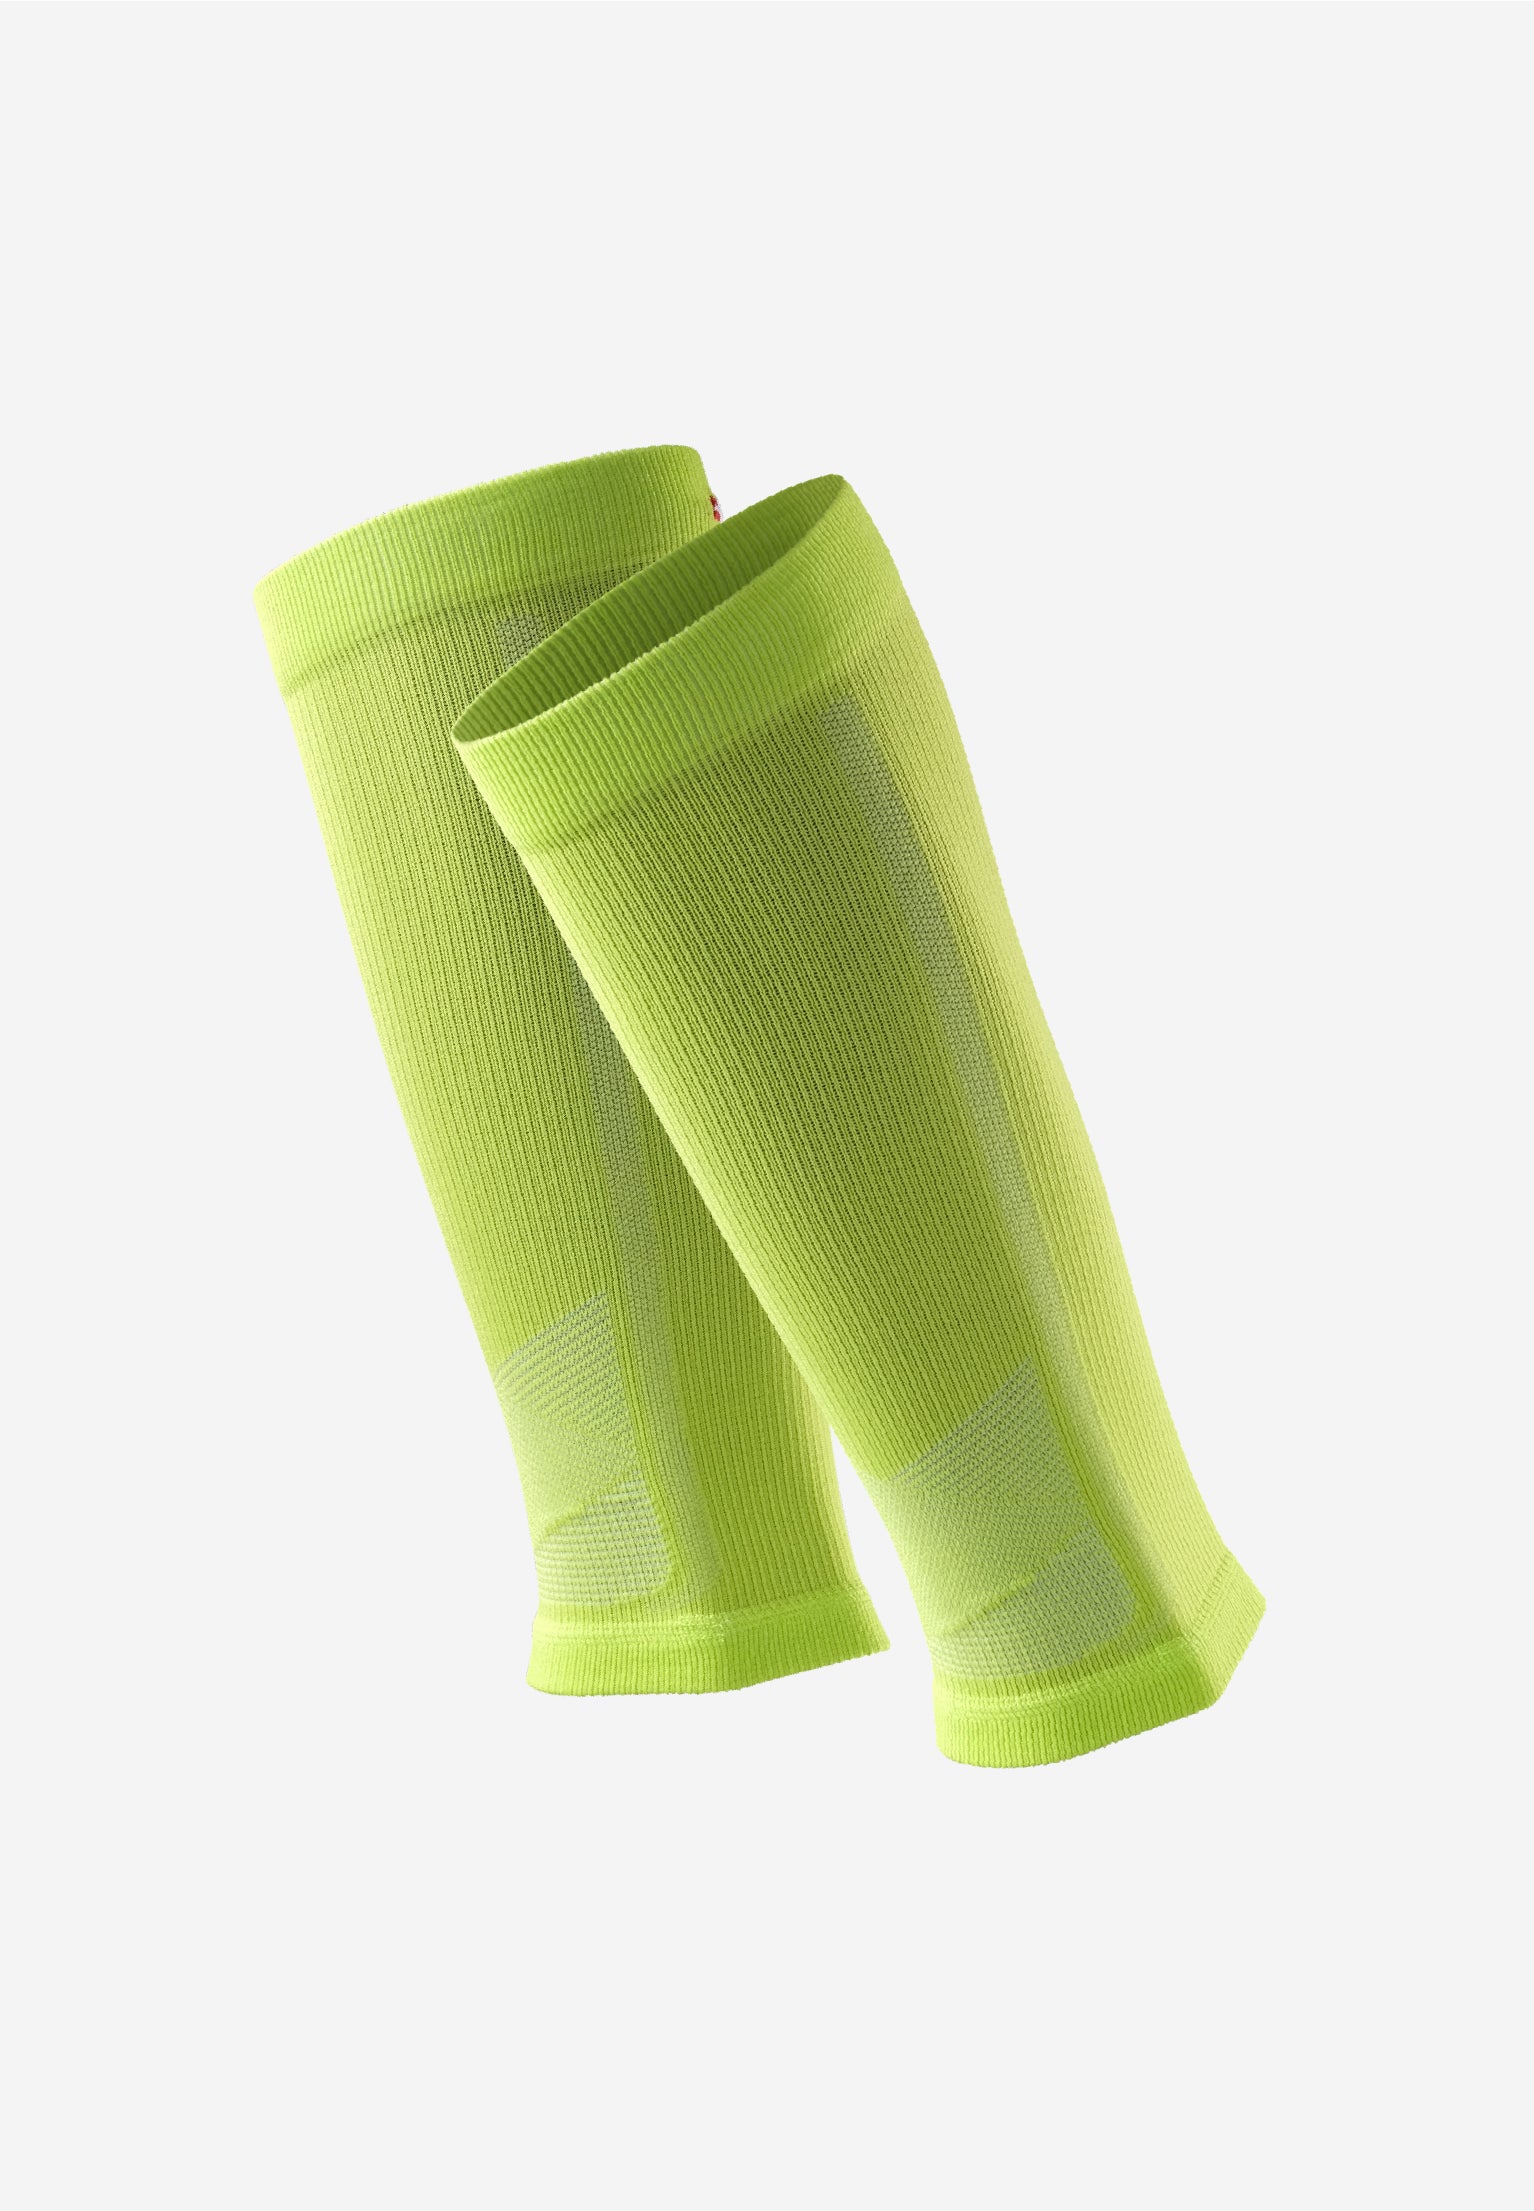 Danish Endurance Compression Socks Review: Sports & Everyday Use